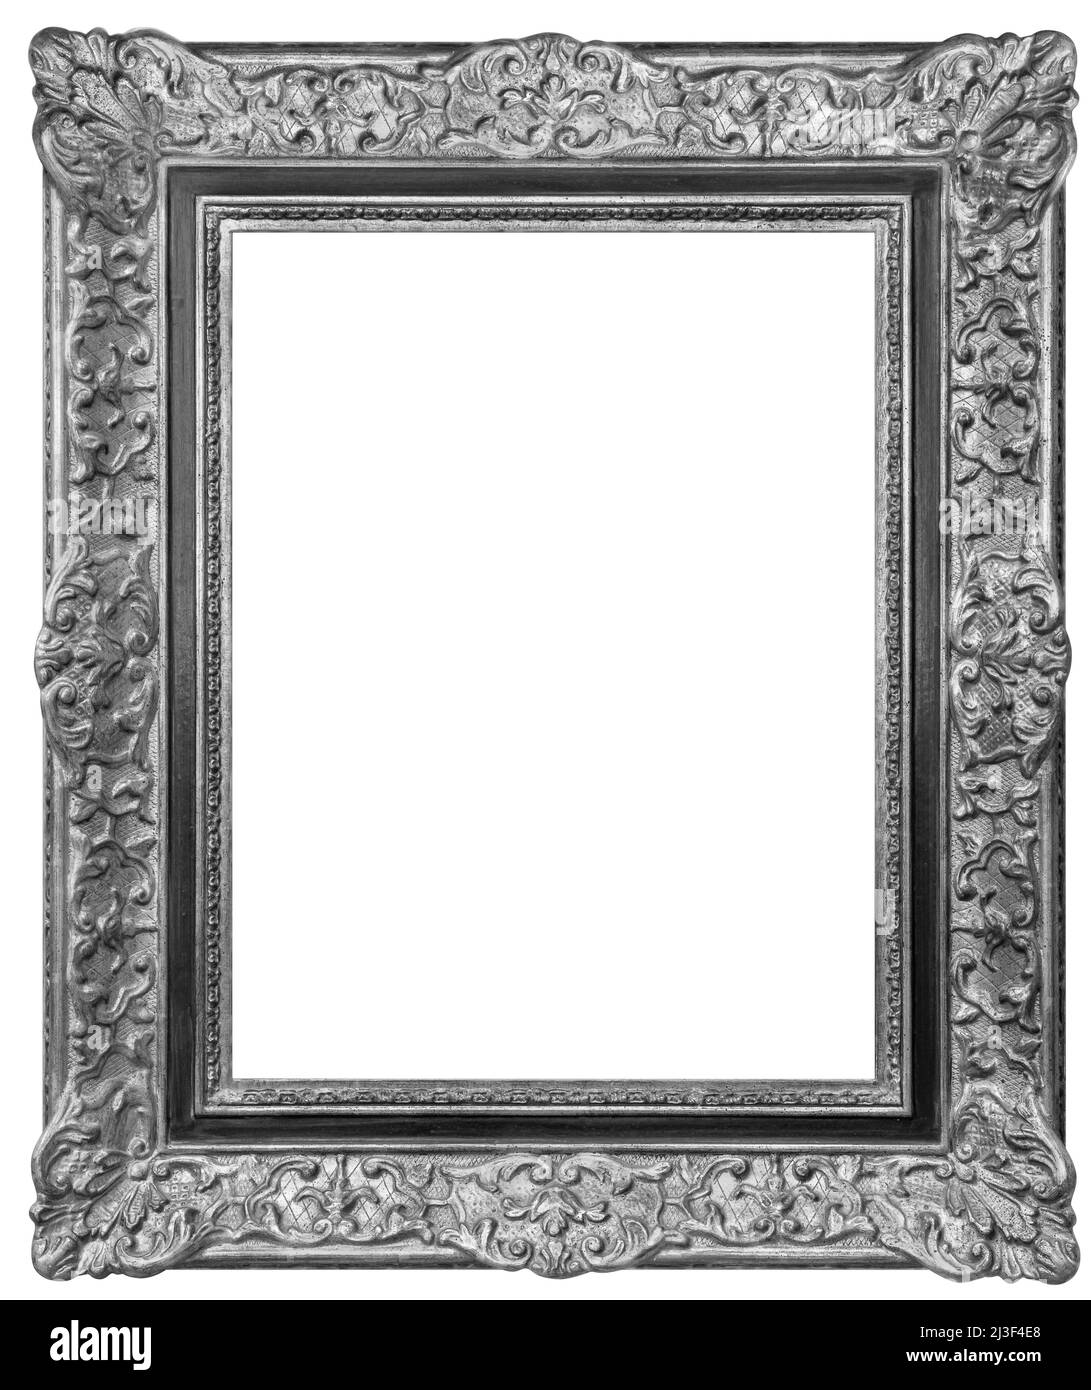 Old rectangular vintage wooden silver-plated frame, isolated on white background Stock Photo